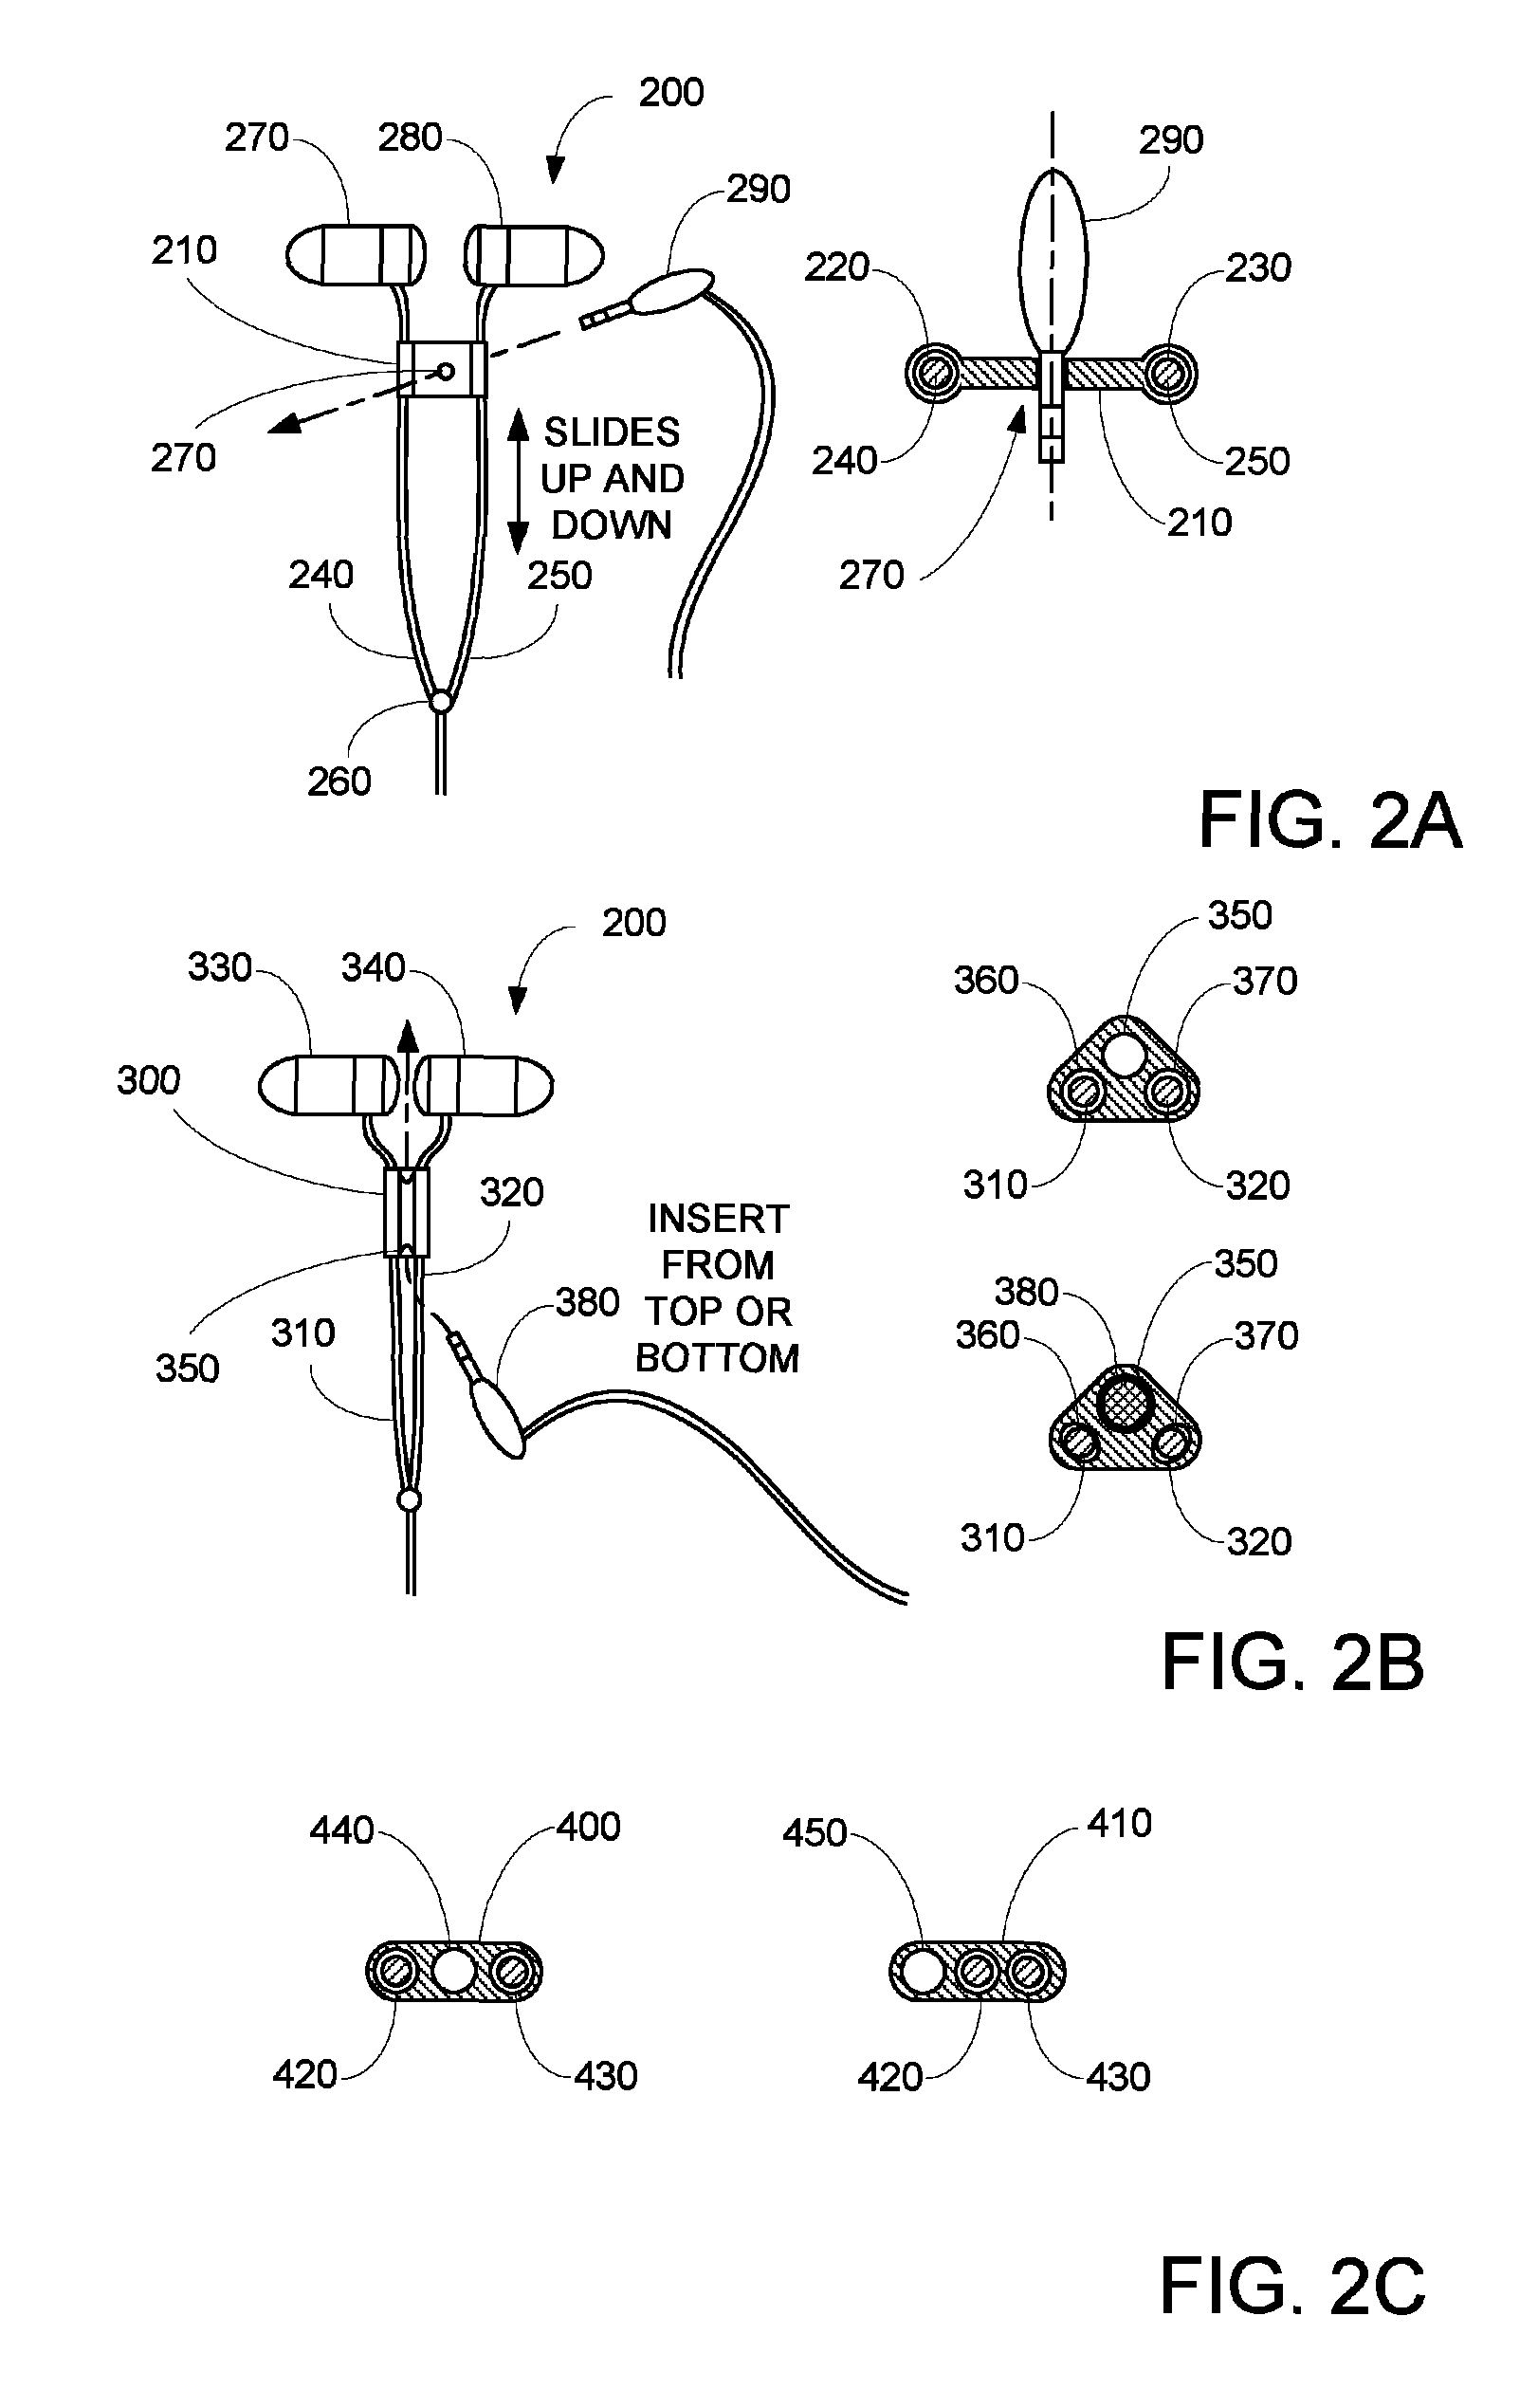 Headphones with reduced tangling and methods